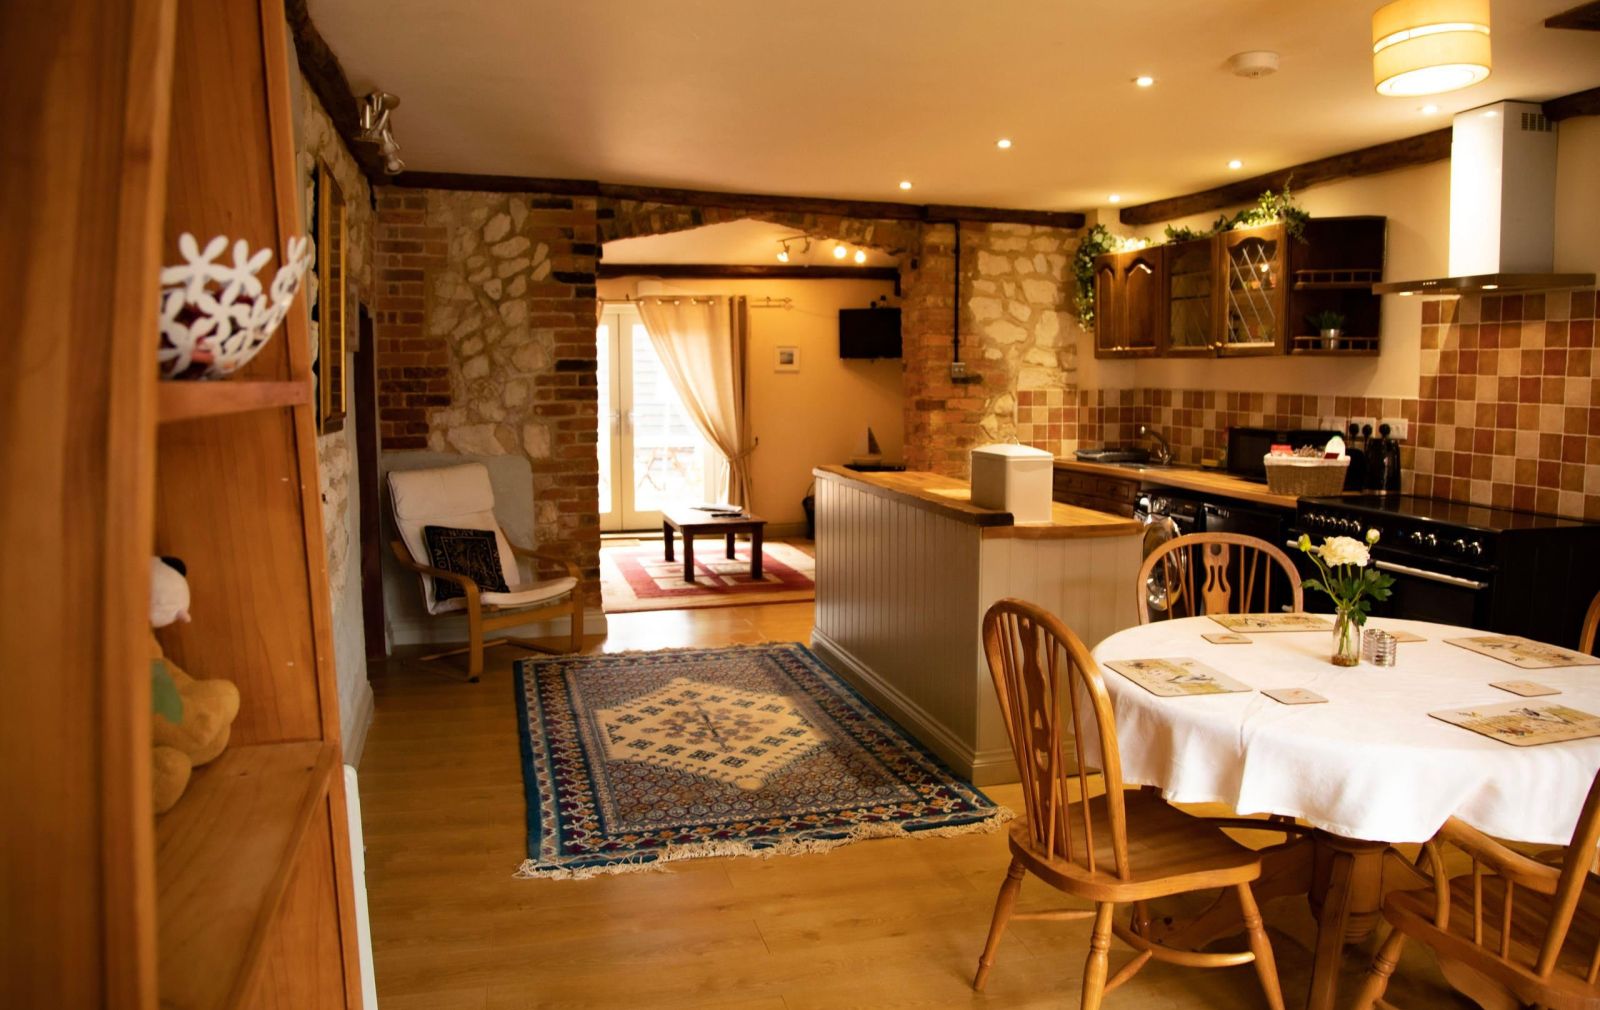 Alternative to Holiday Let: Self-Catering cottage "The Barn"